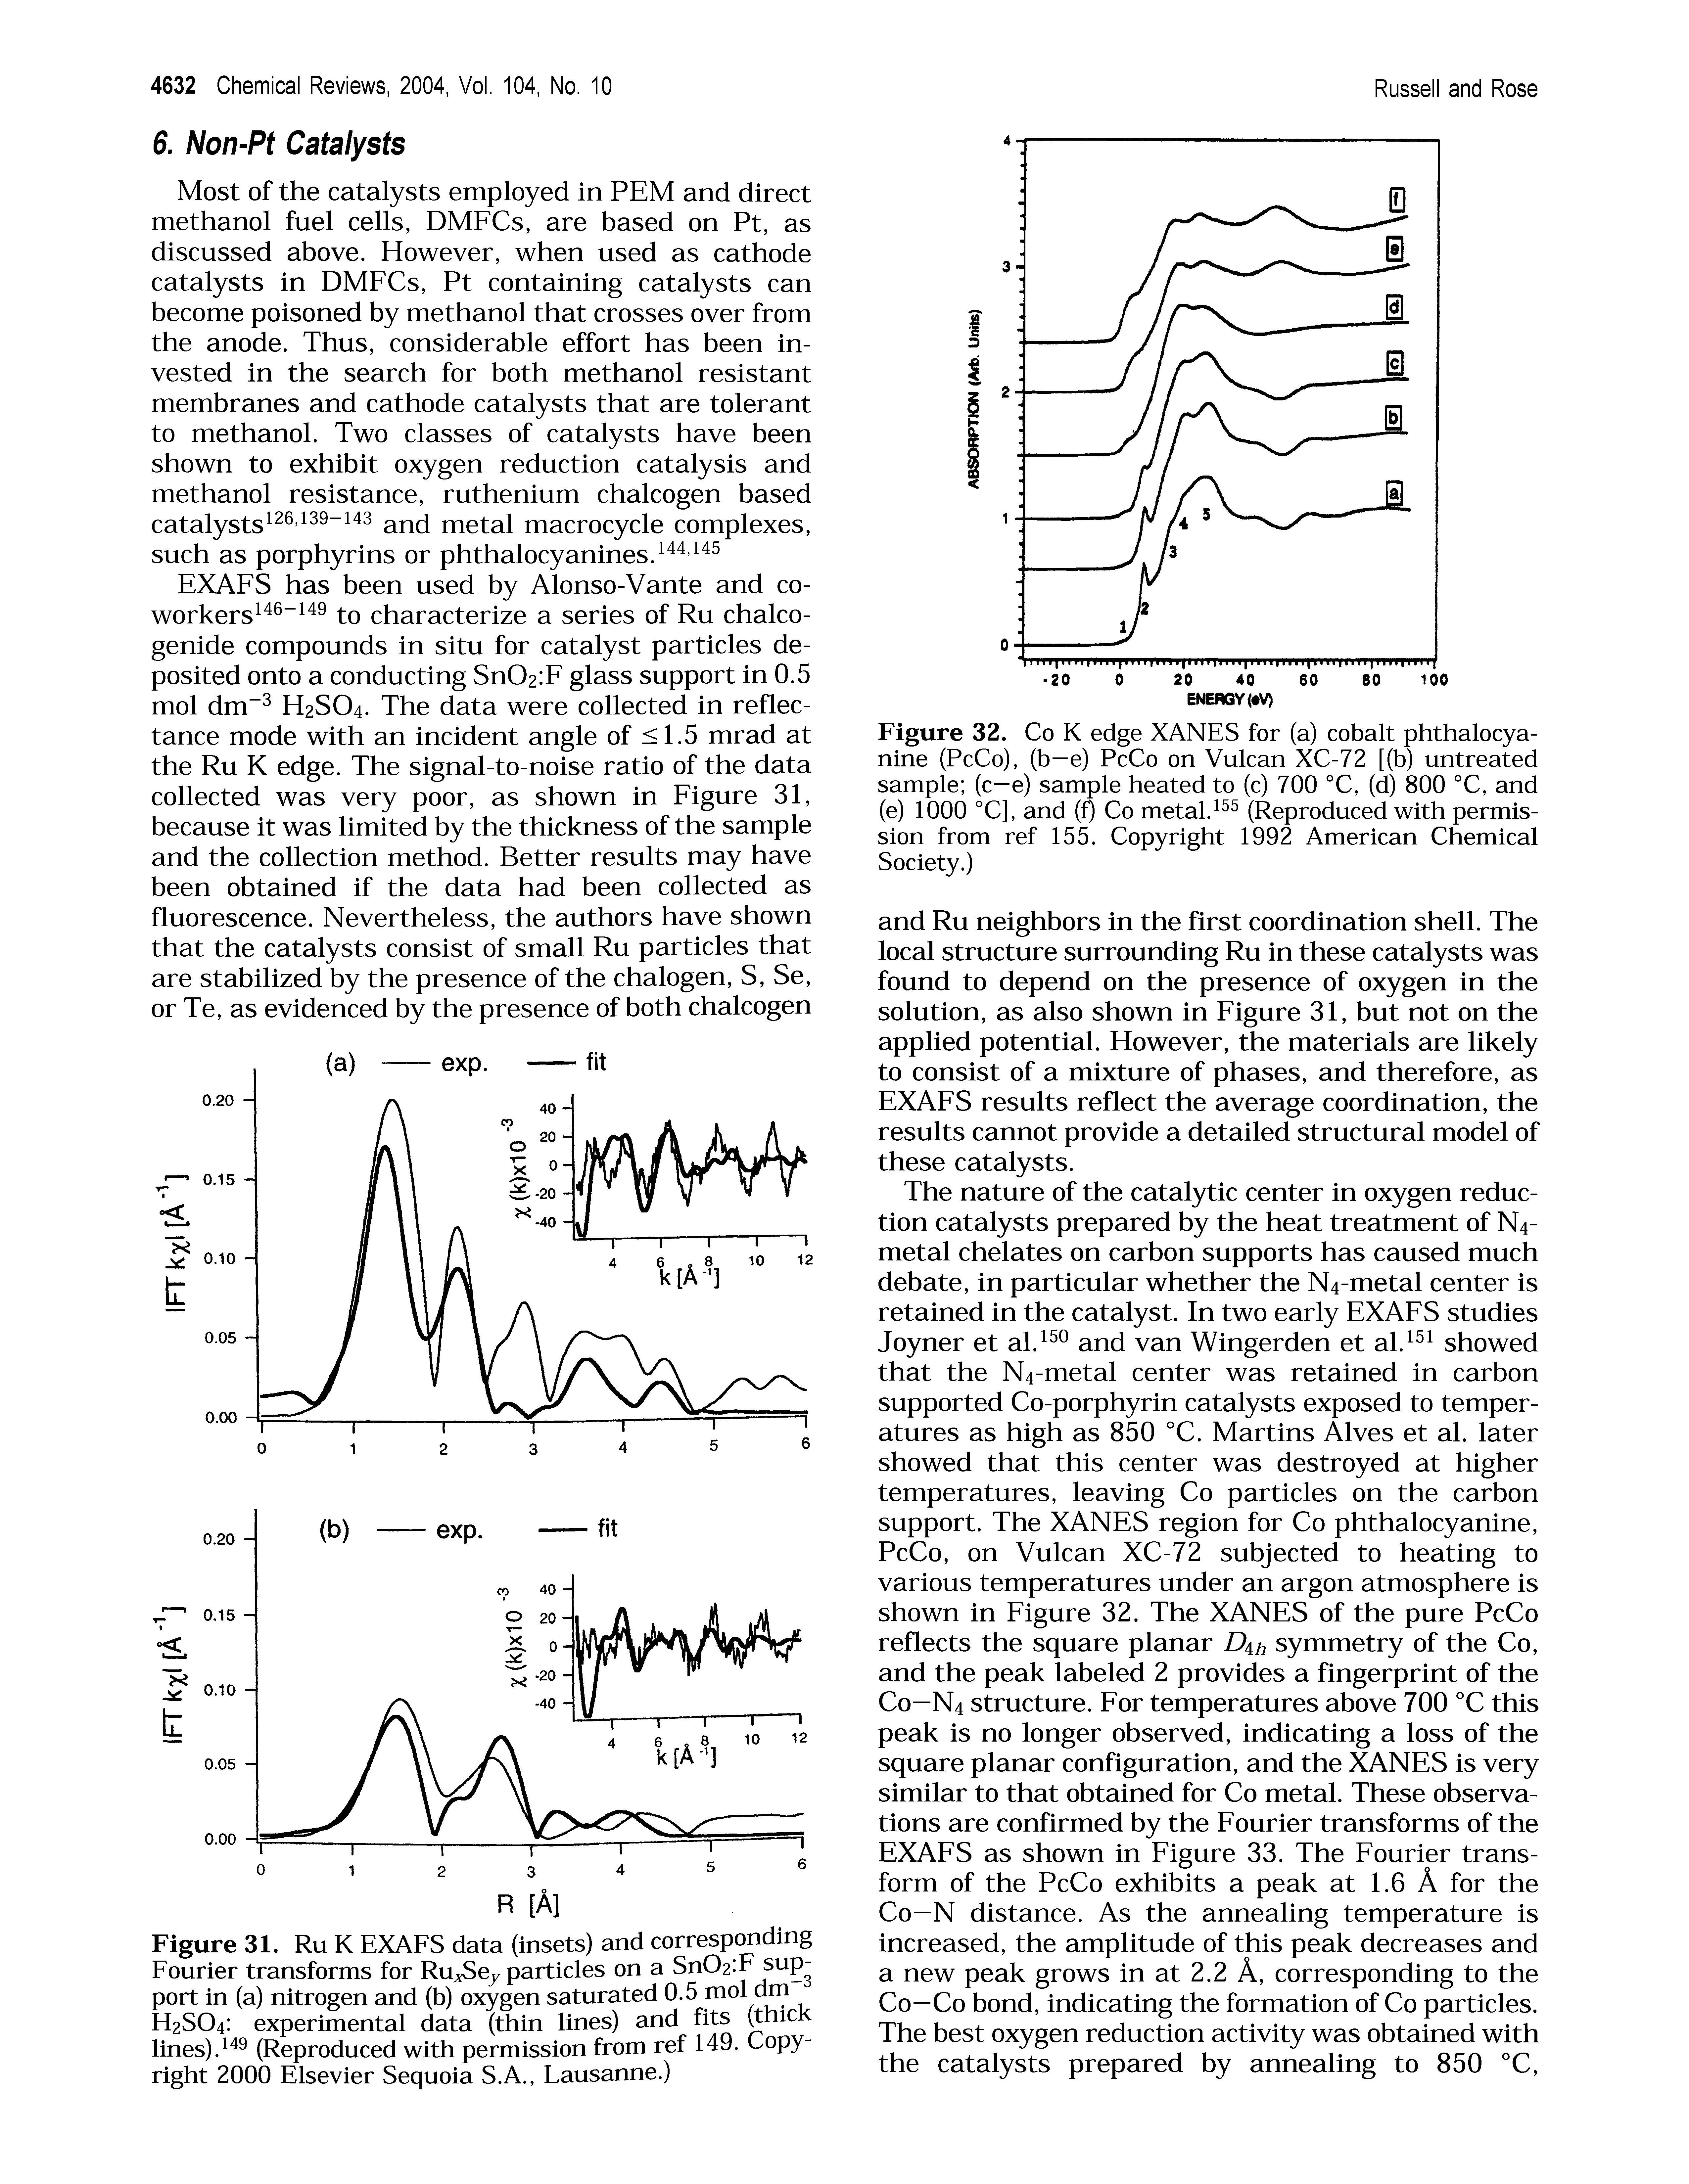 Figure 31. Ru K EXAFS data (insets) and correspmding Fourier transforms for Ru tSej particles on a Sn02 F support in (a) nitrogen and (b) oxygen saturated 0.5 i ol dm H2SO4 experimental data (thin lines) and fits hicK lines).(Reproduced with permission from ref 149. Copyright 2000 Elsevier Sequoia S.A., Lausanne.)...